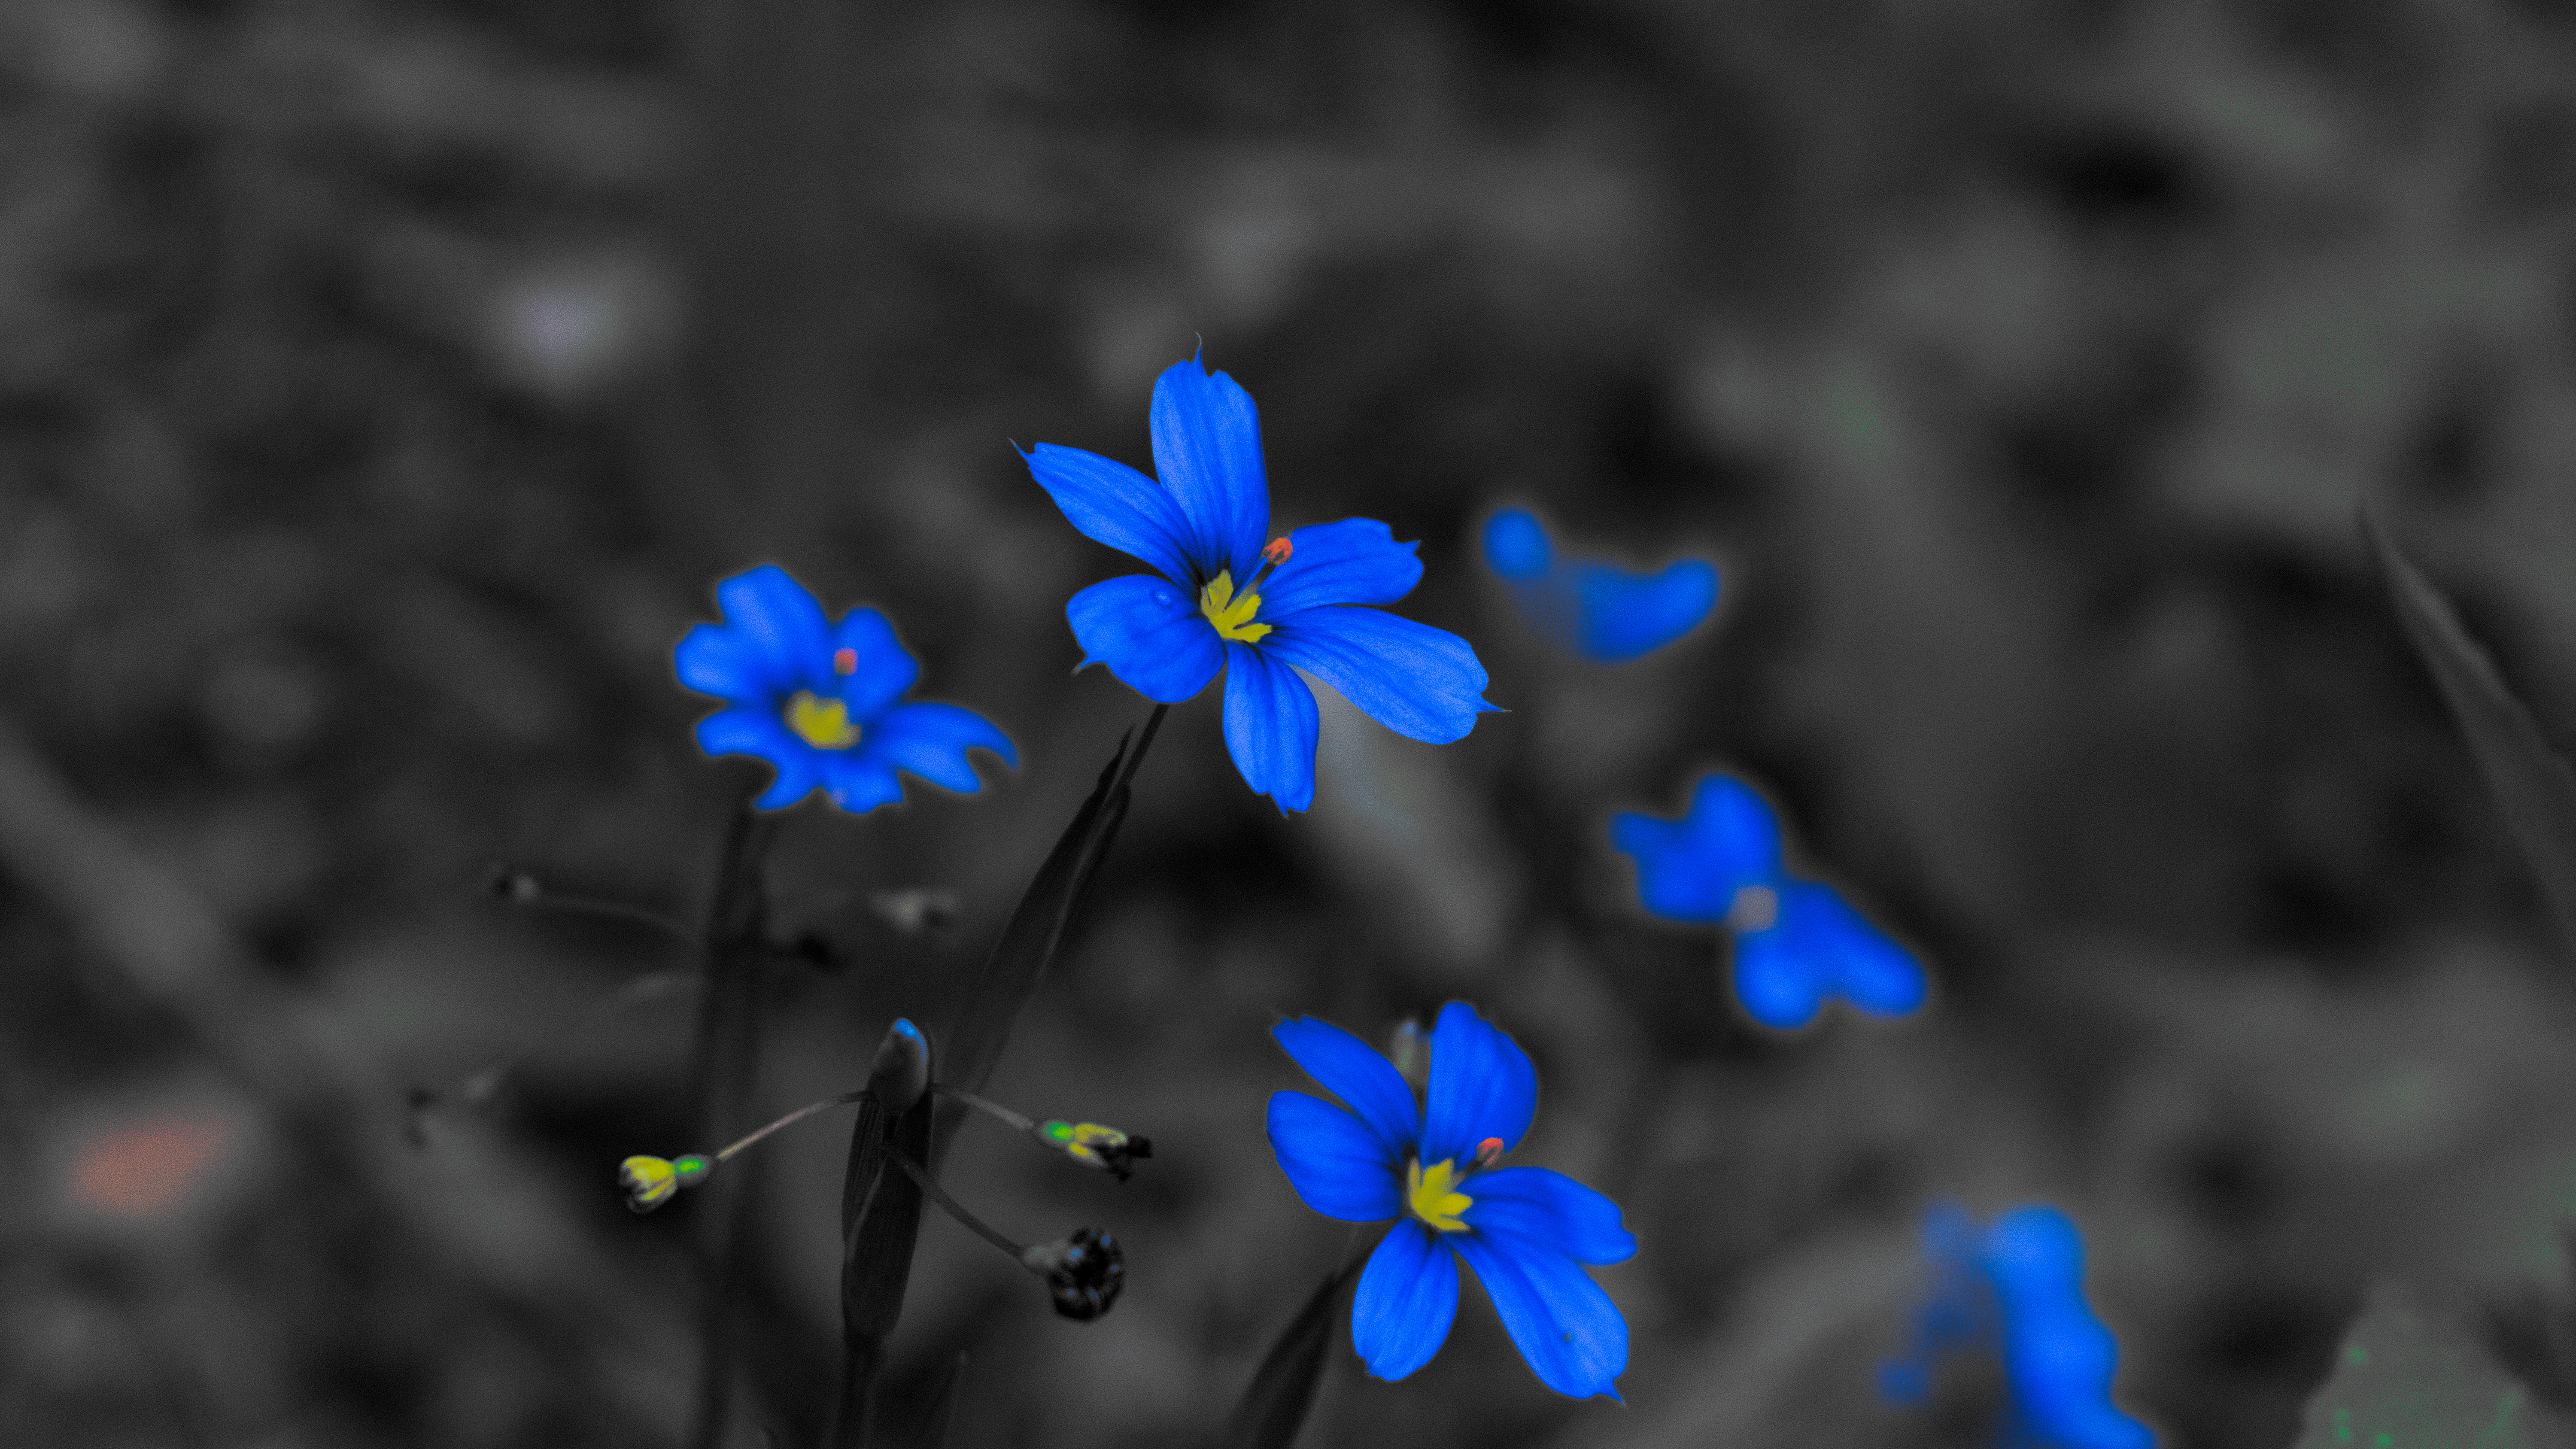 General 6000x3375 blue flowers nature flowers blue selective coloring macro blurry background blurred petals minimalism simple background